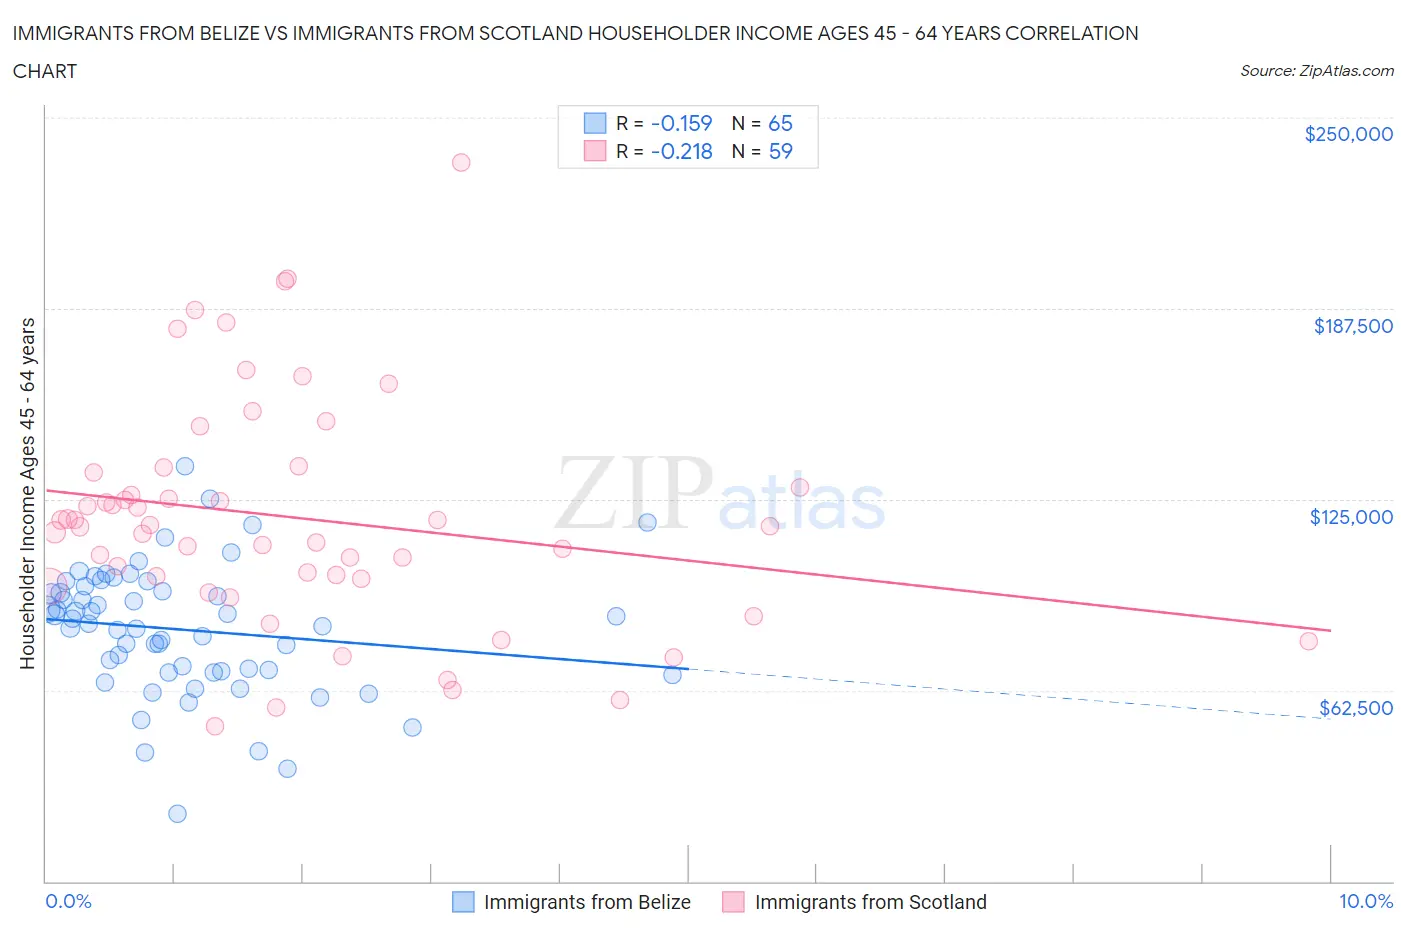 Immigrants from Belize vs Immigrants from Scotland Householder Income Ages 45 - 64 years